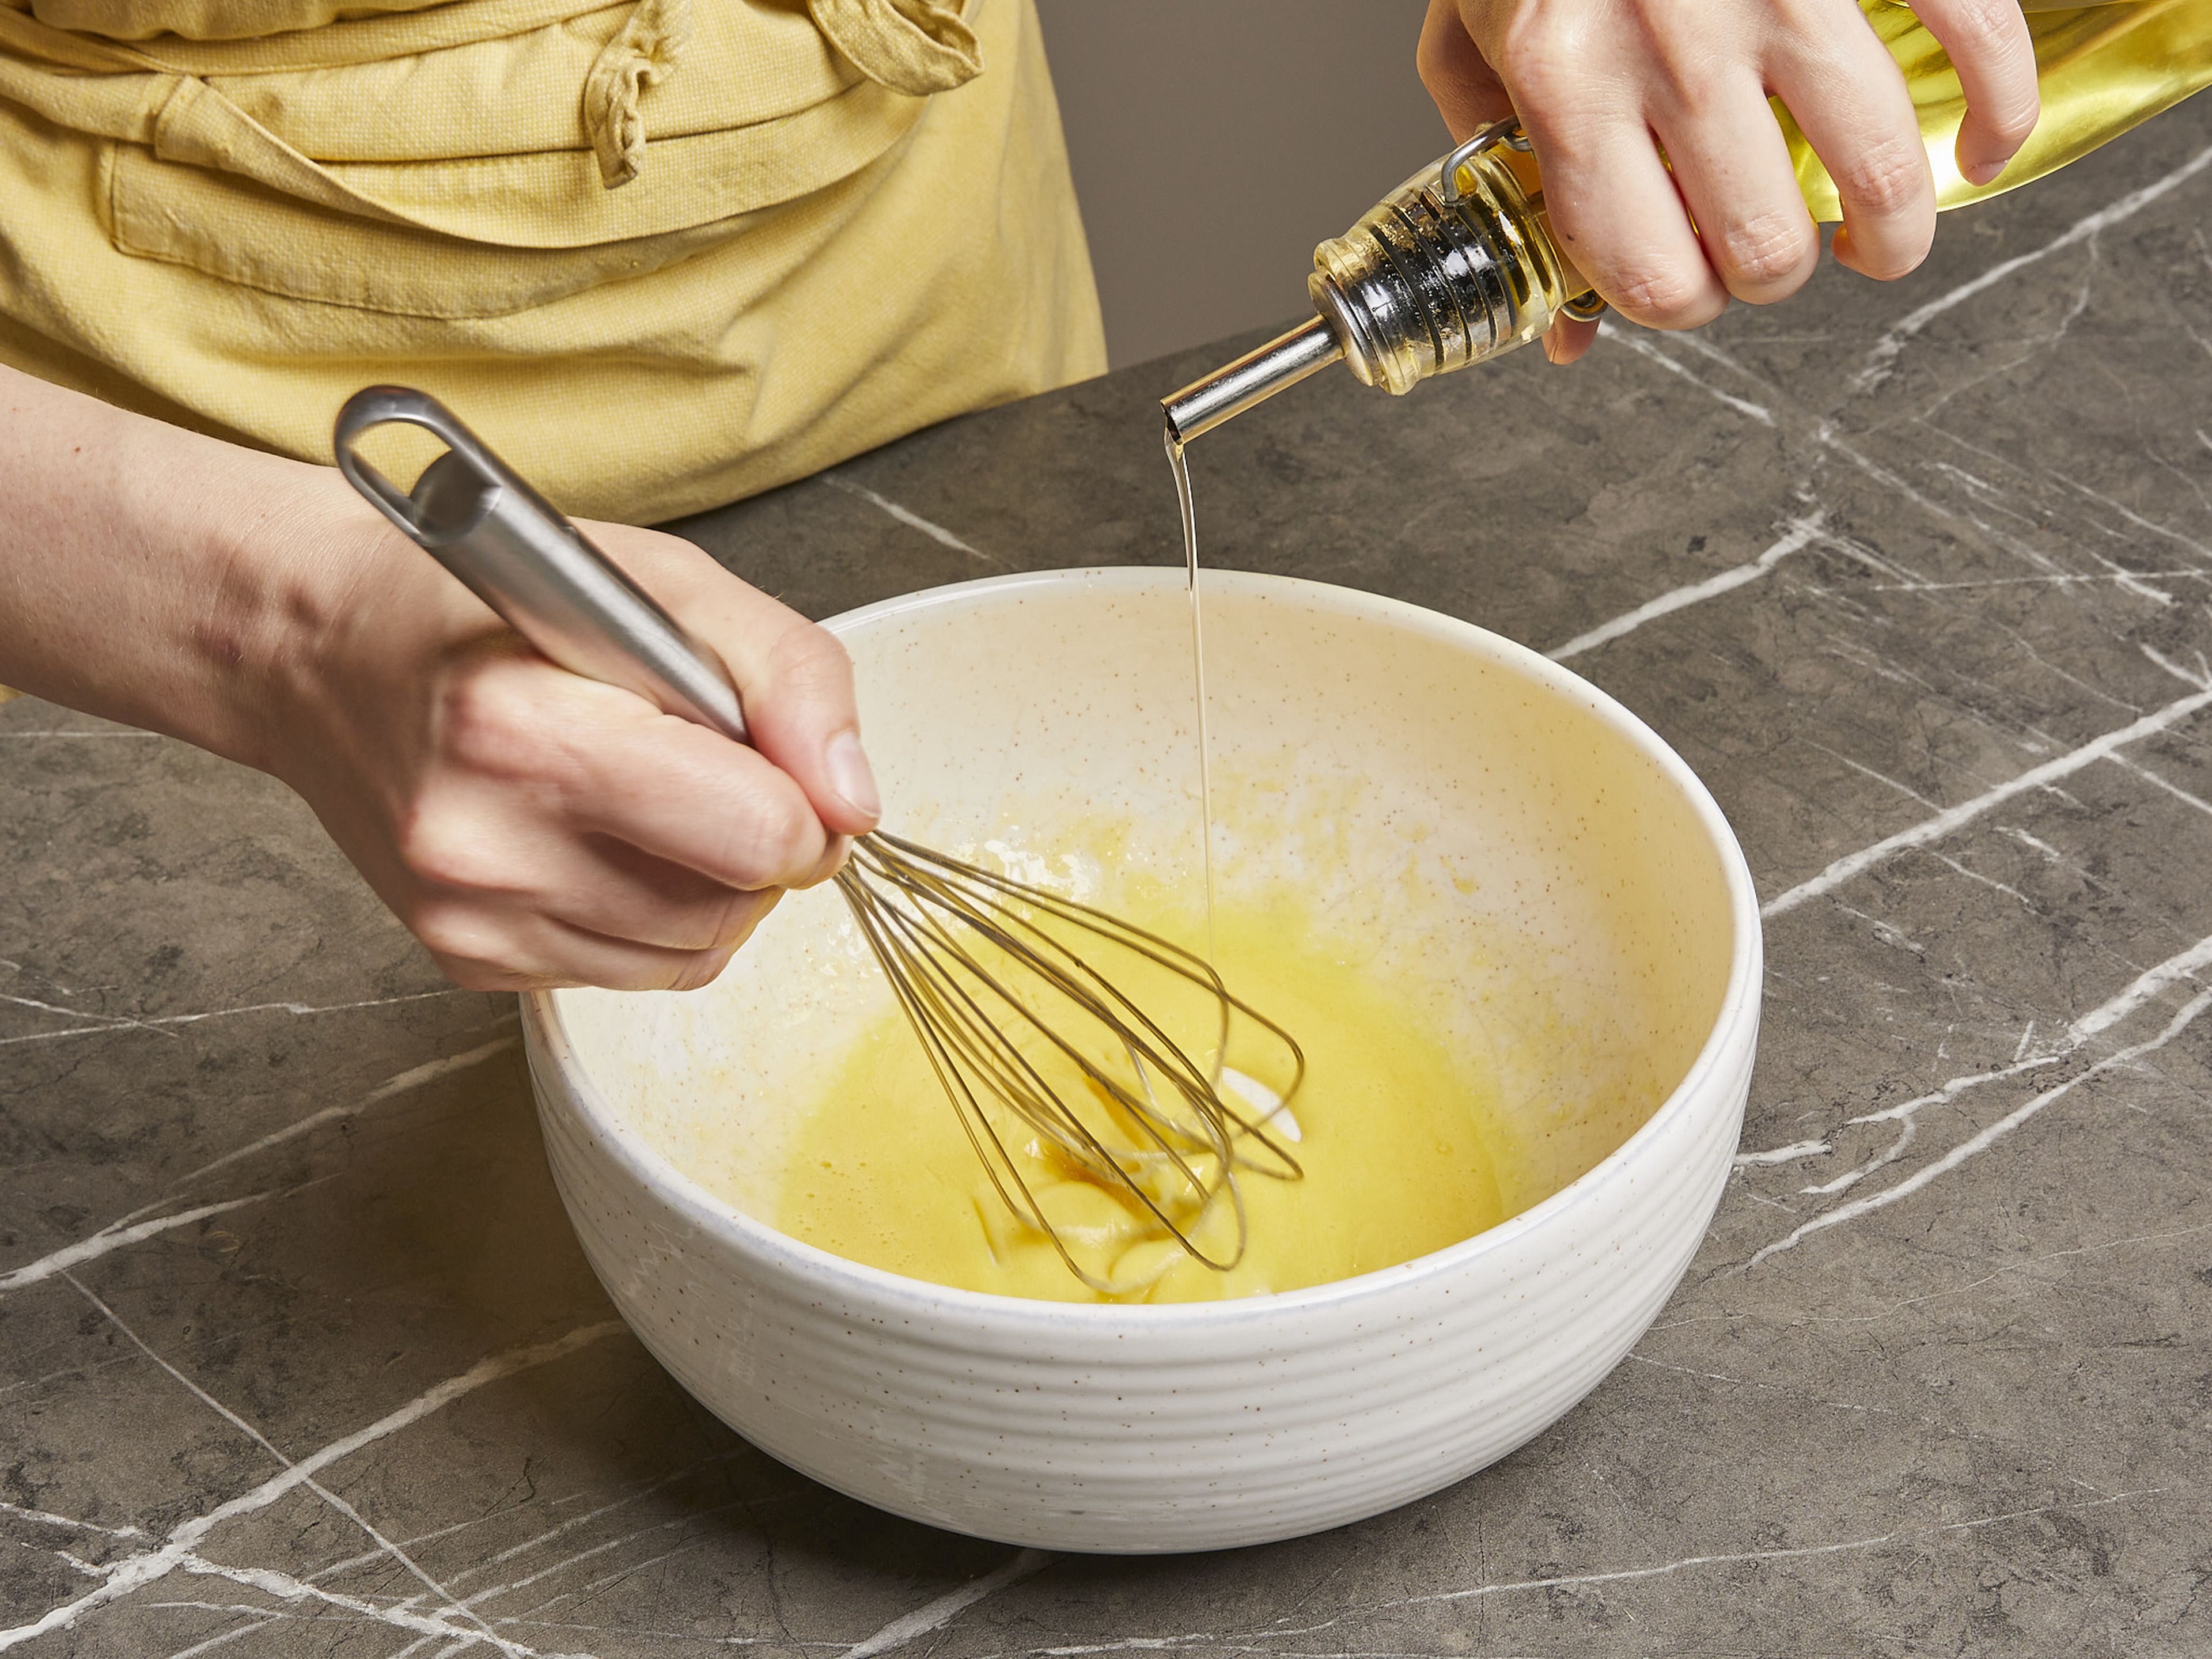 For the mayonnaise, whisk the egg yolk and mustard in a bowl while slowly pouring in the oil. When the mayonnaise is creamy, season with lemon zest, the juice of half a lemon, salt and pepper and set aside.